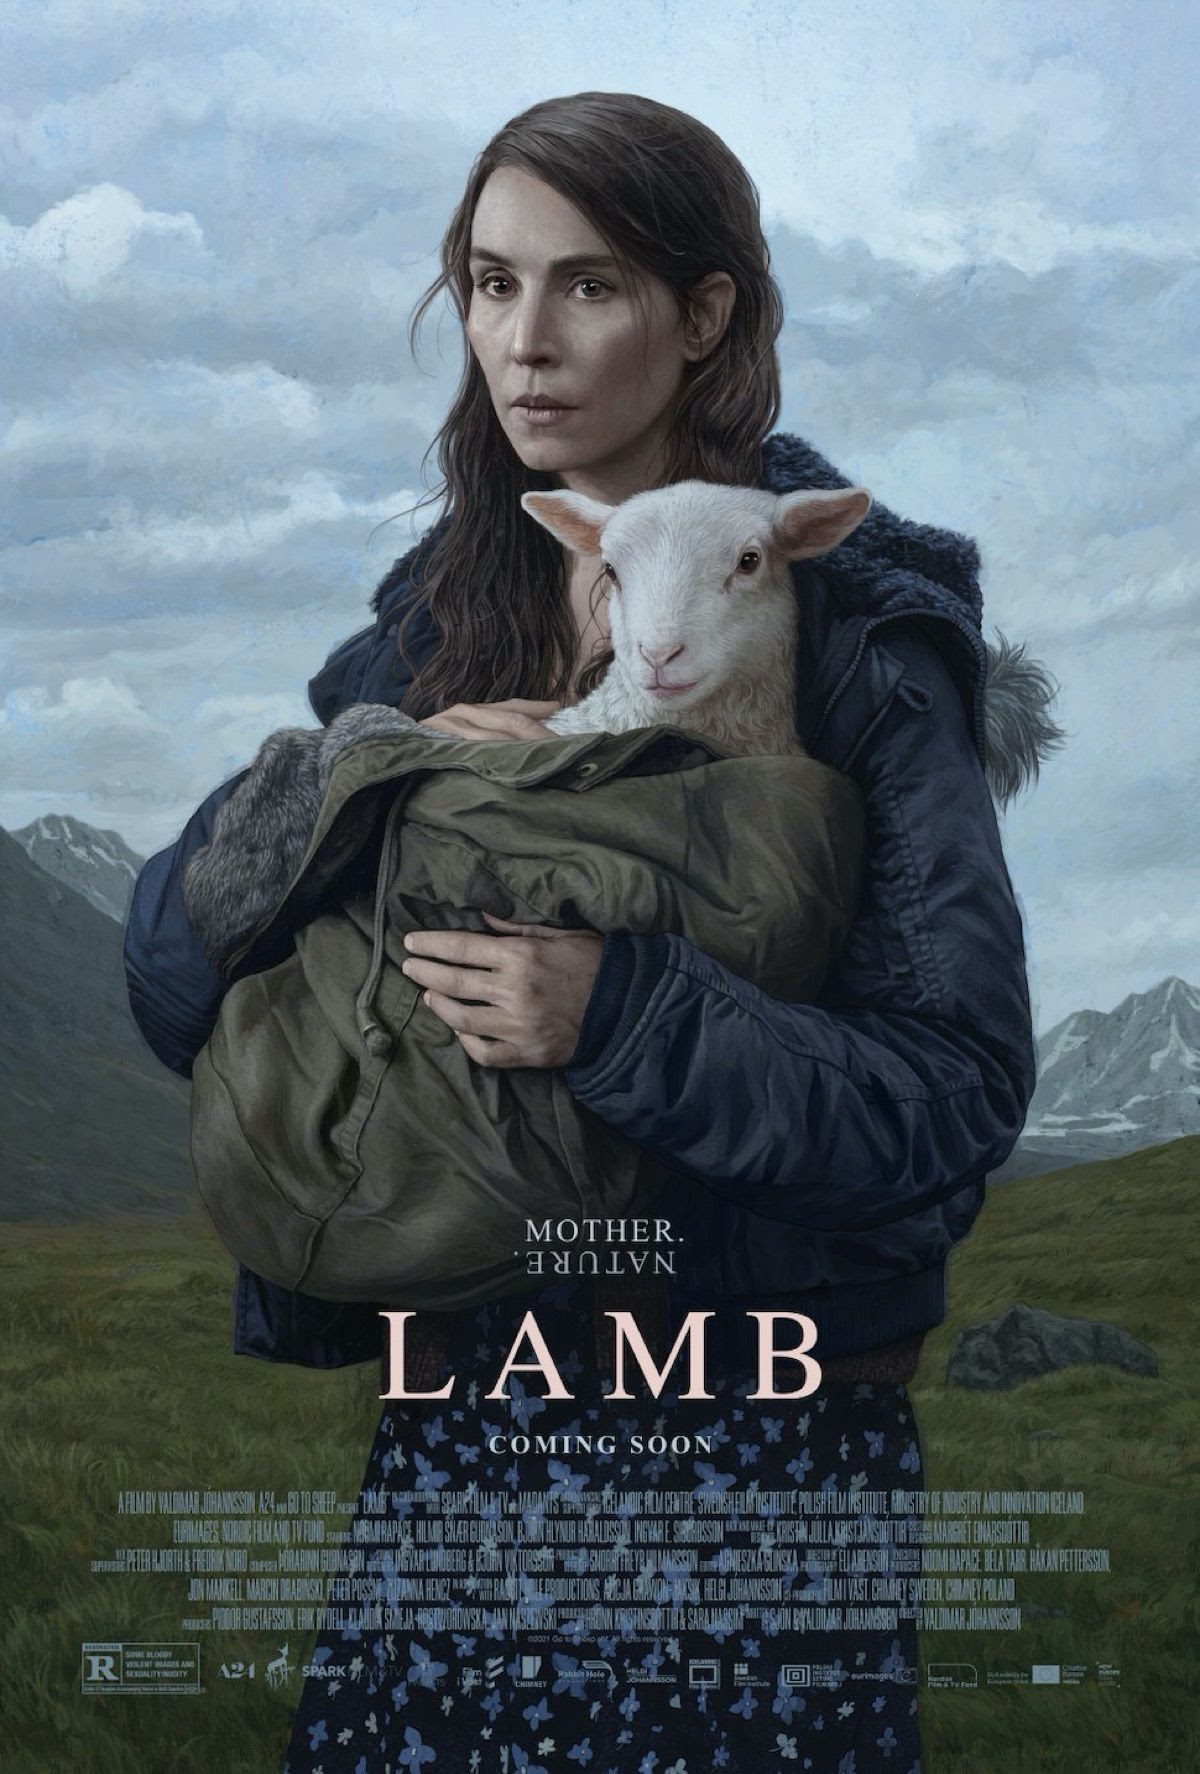 Lamb movie review poster (Courtesy of A24)